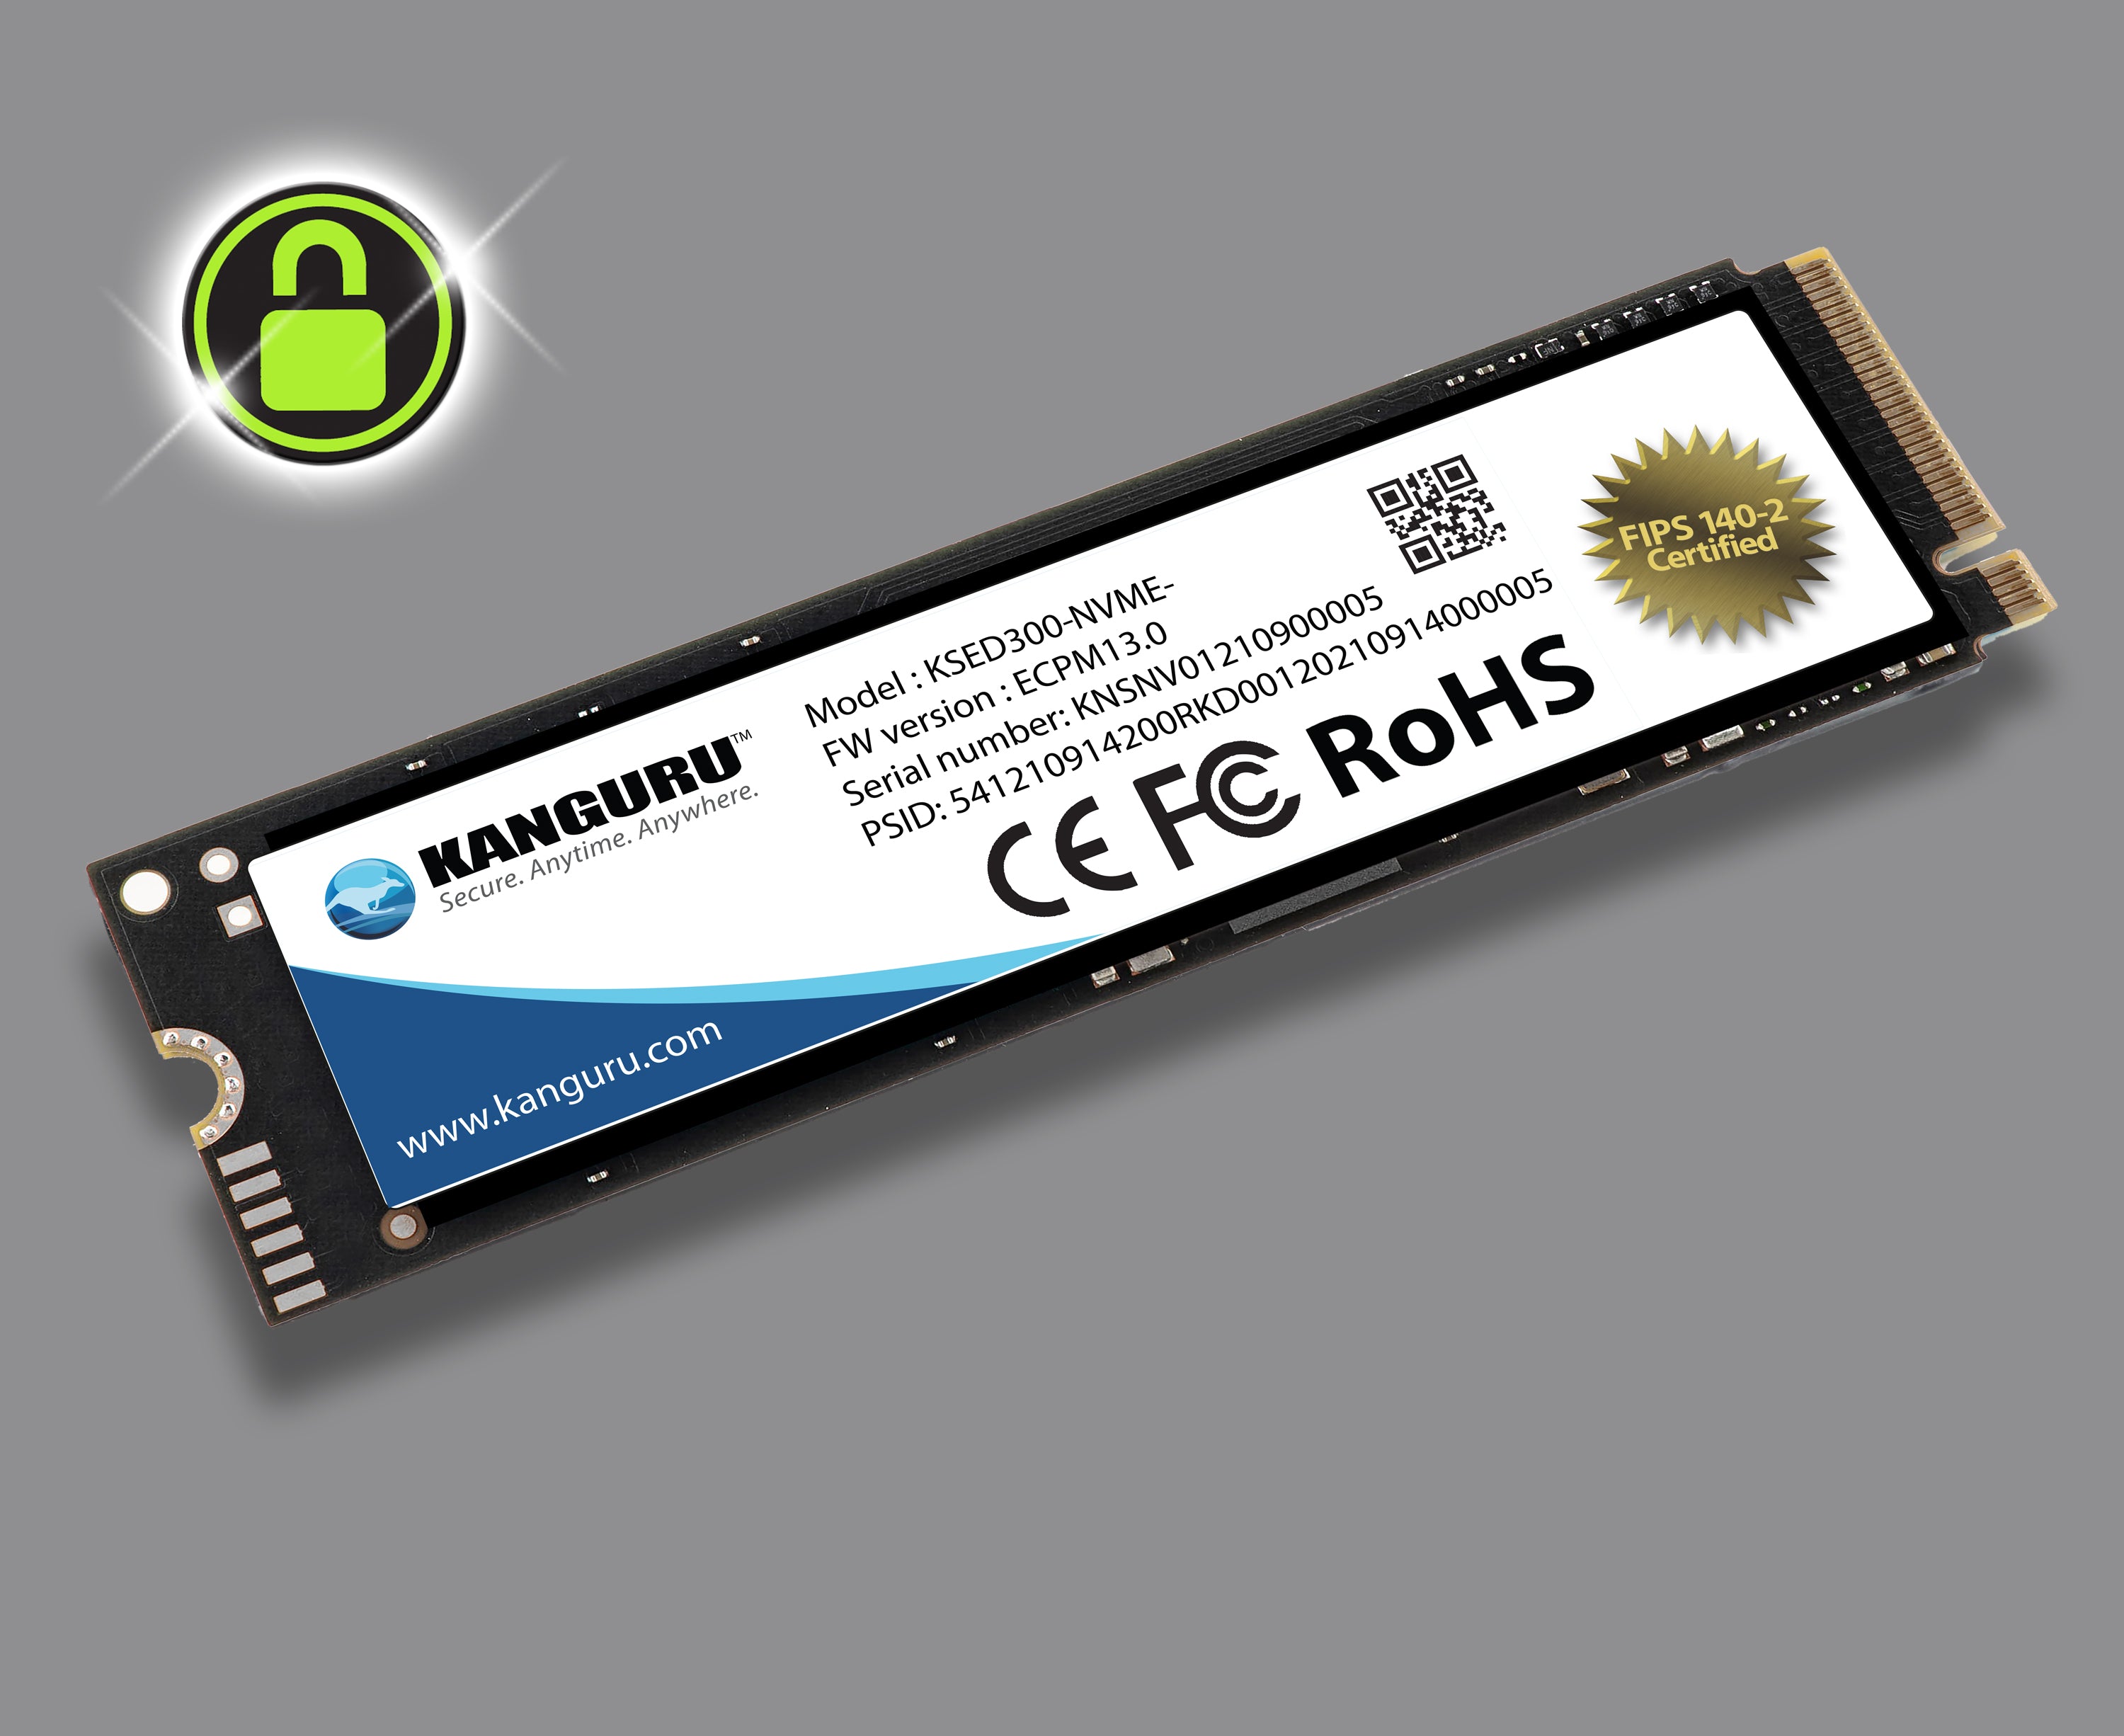 The FIPS 140-2 Certified, Kanguru Opal SED300 M.2 NVMe Internal Self-Encrypting Solid State Drive is the perfect solution for any organization or individual looking to secure data and meet the toughest compliance standards.